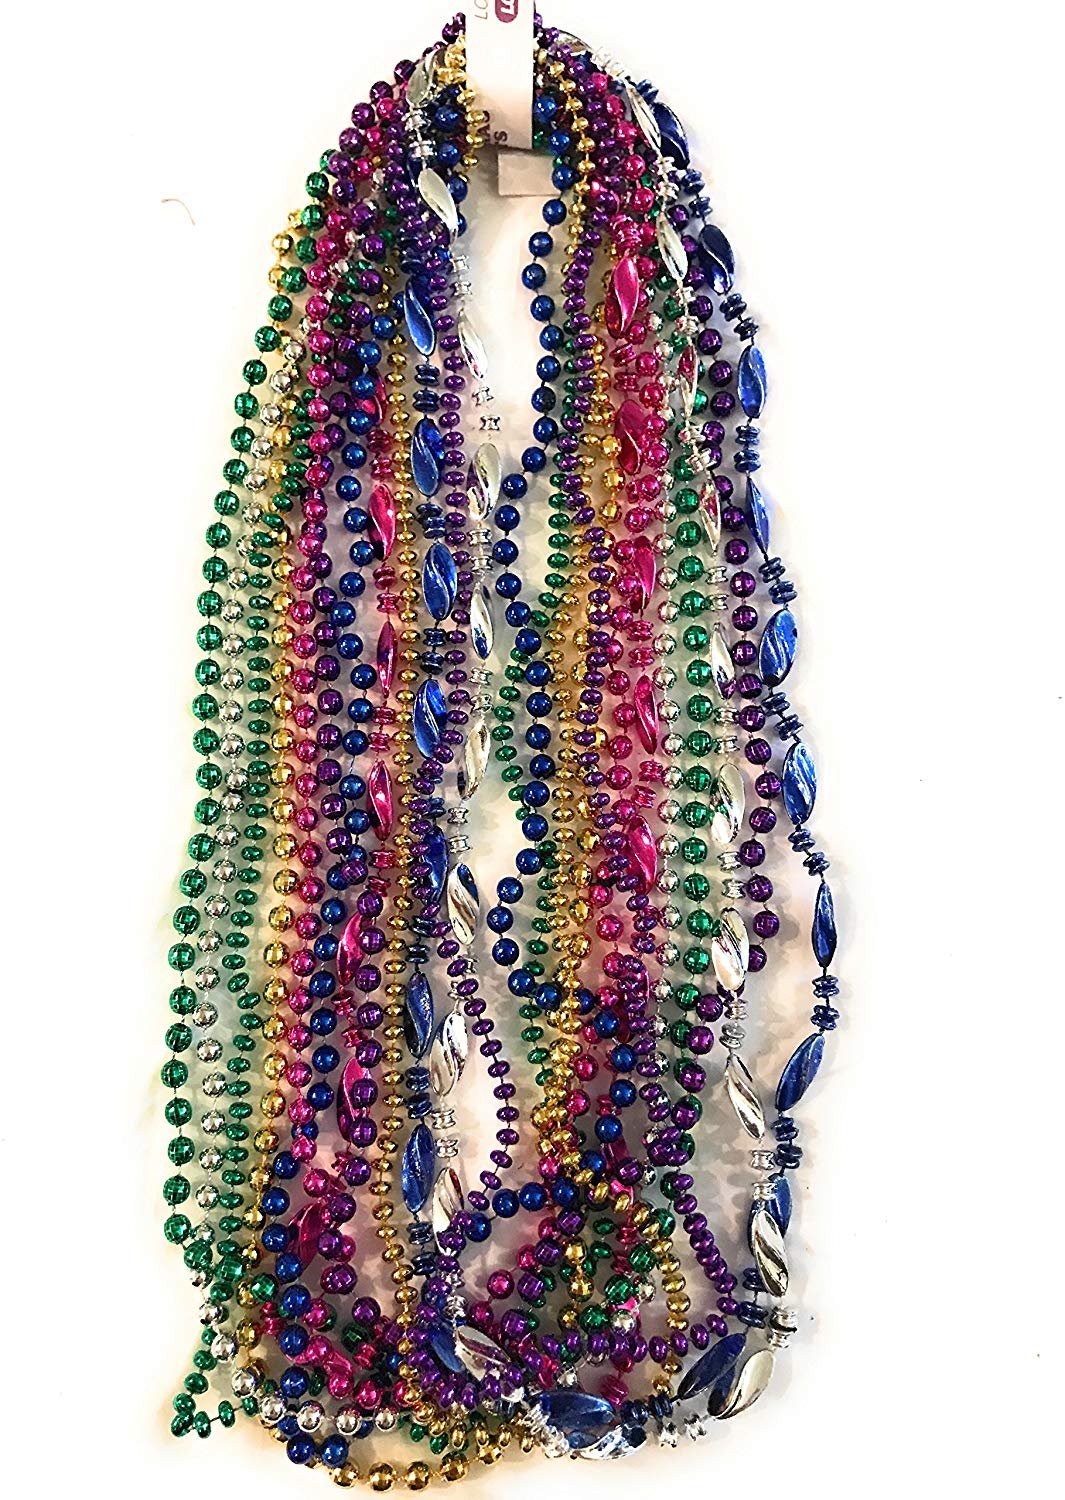 Mardi Gras Beads - Beaded Necklaces -12 Assorted Styles and Colors for  Party Favors By The Mardi Gras Krewe